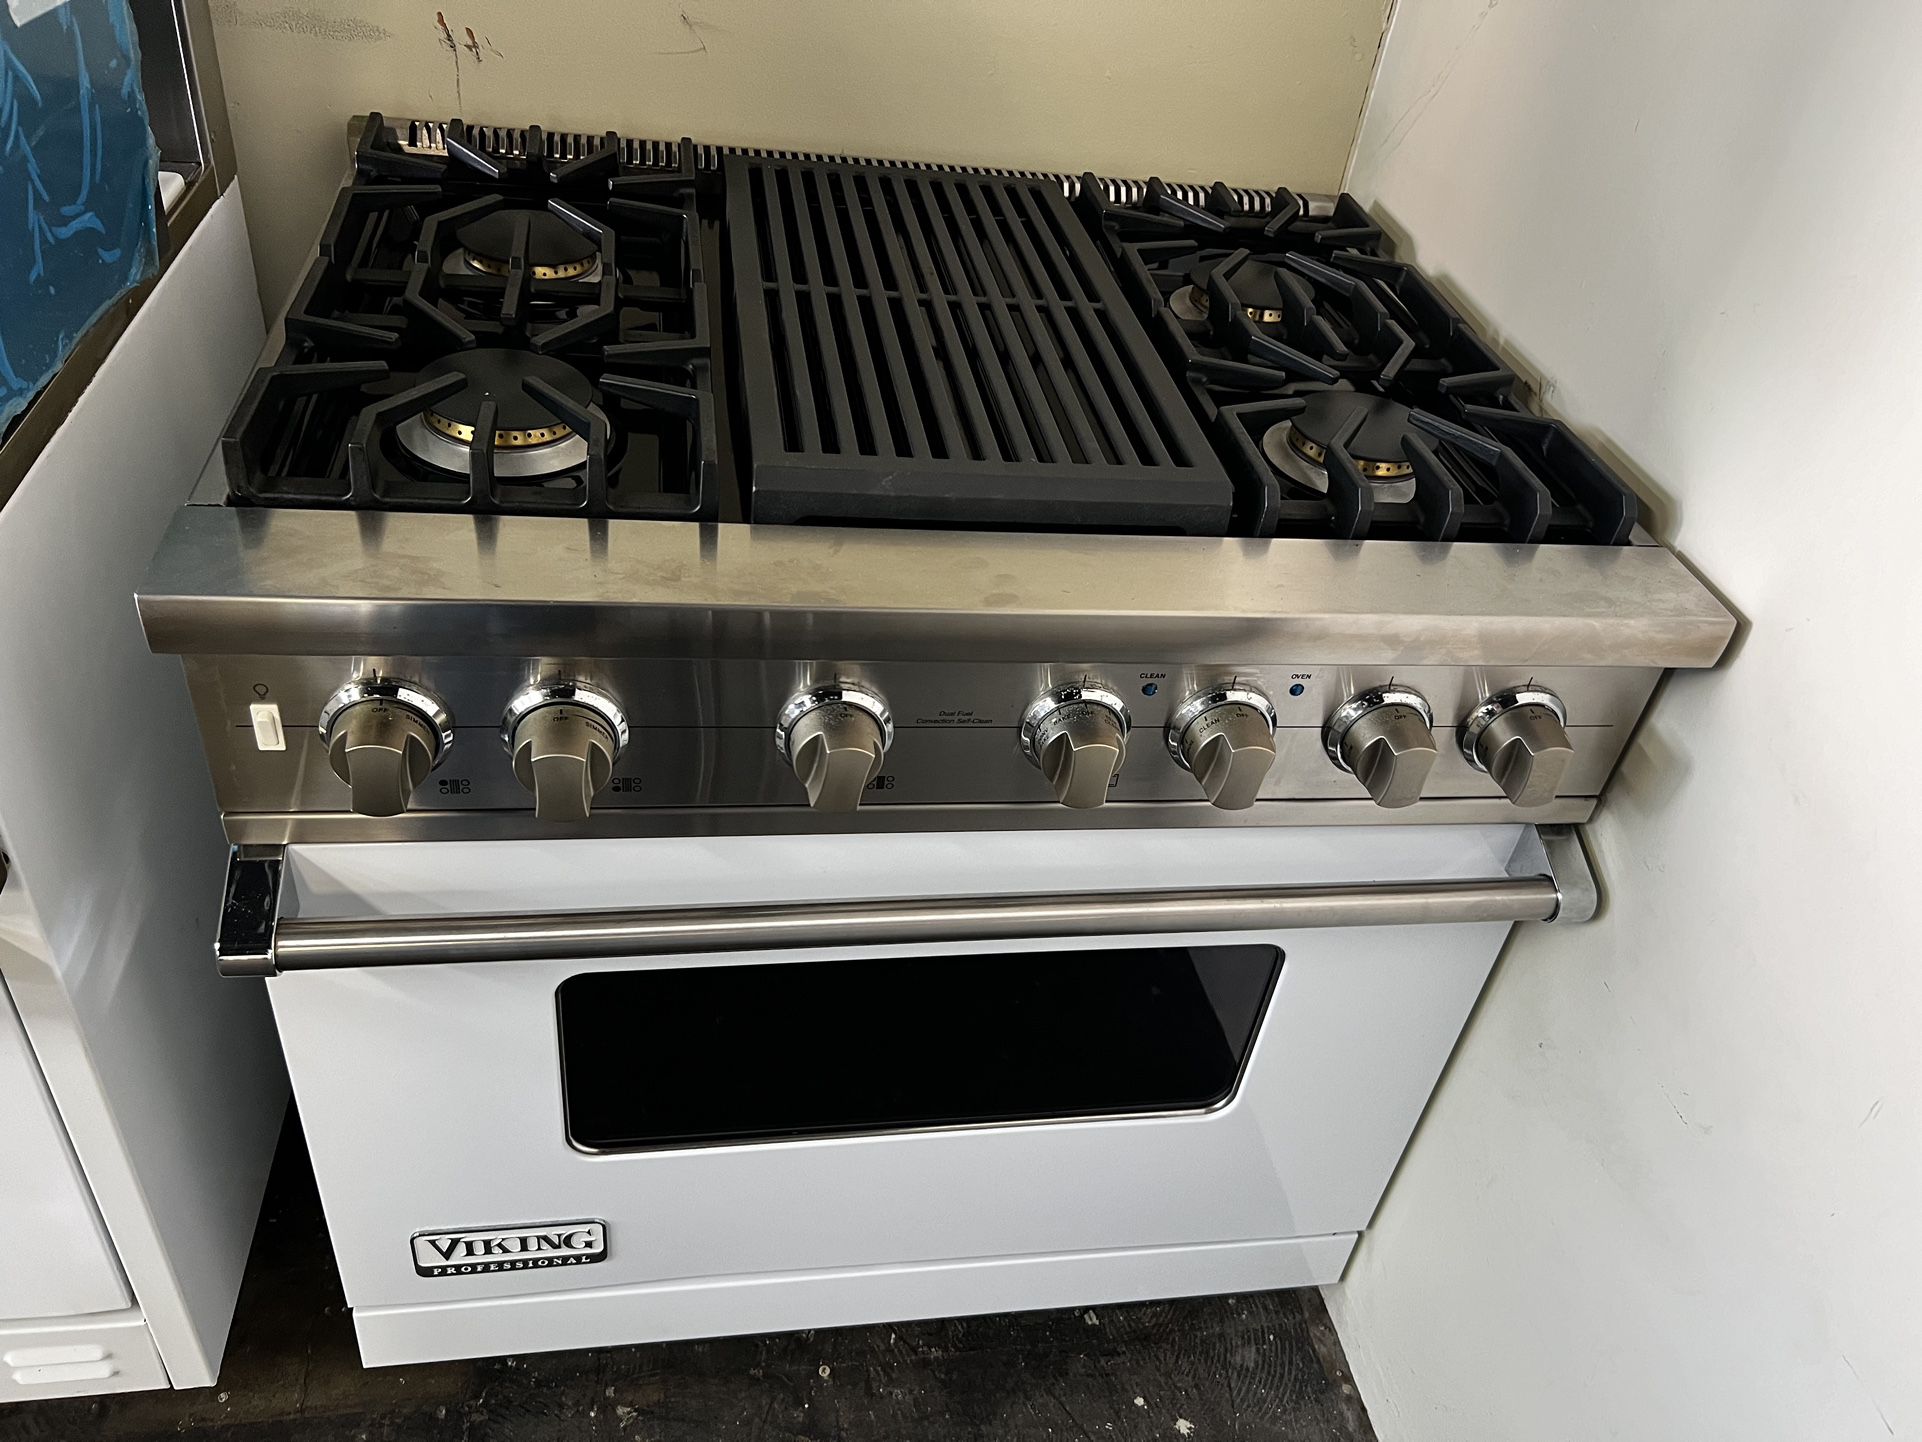 Viking 36”wide Dual Fuel Range Stove With Charbroil Grill